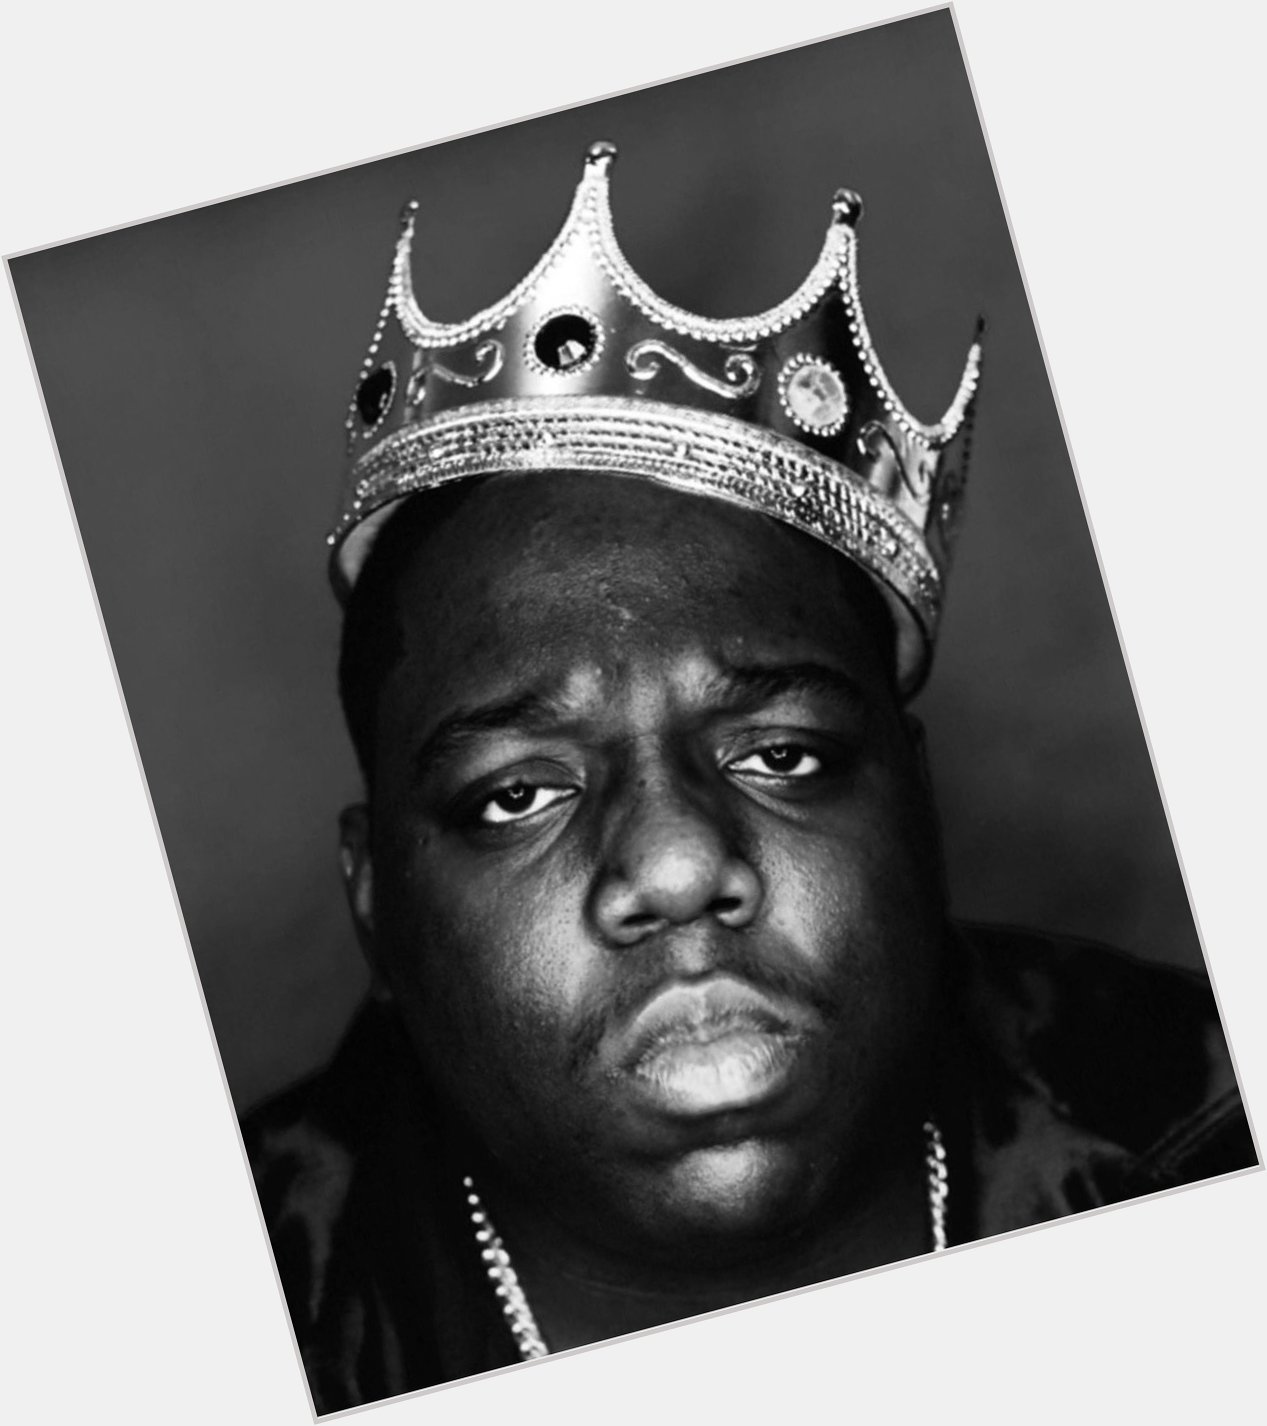  Happy Birthday, Christopher Wallace a.k.a. Biggie Smalls... Notorious B.I.G. Continue to R.I.P. 